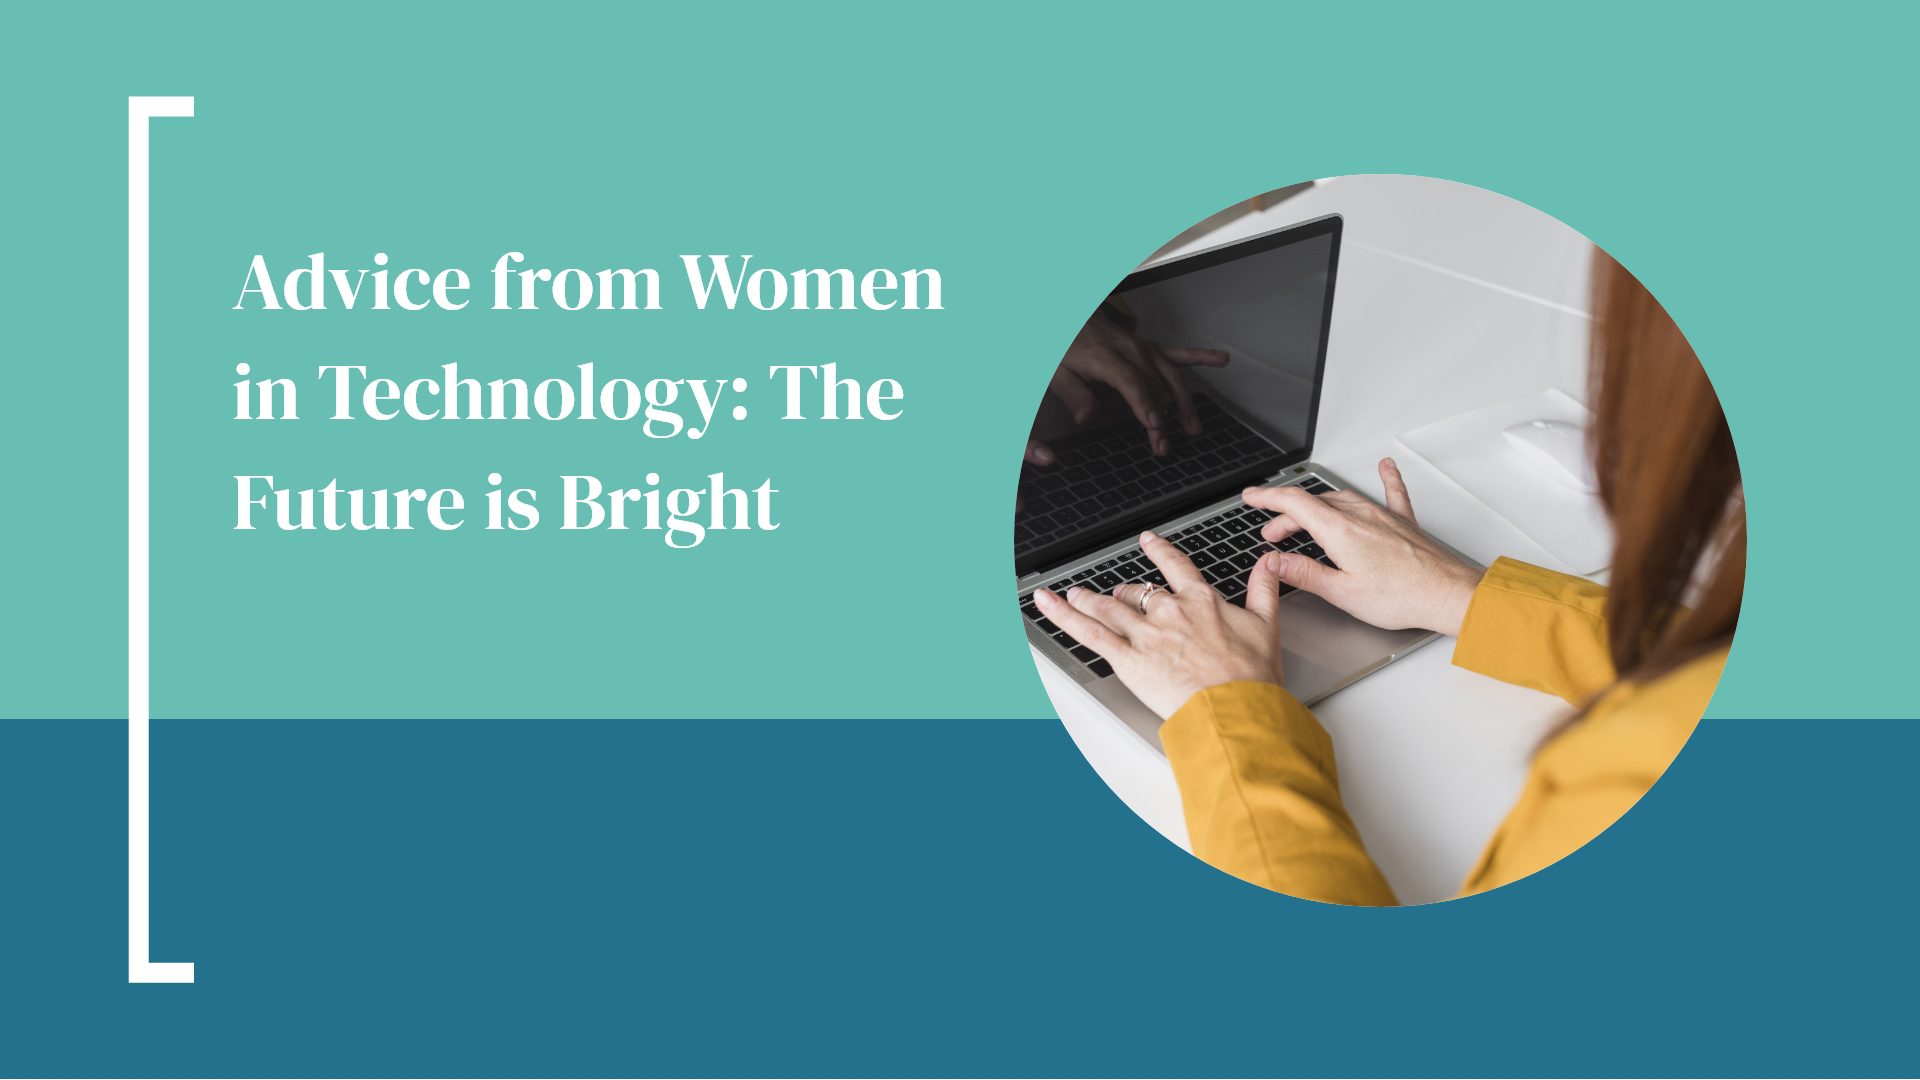 Advice from Women in Technology: The Future is Bright